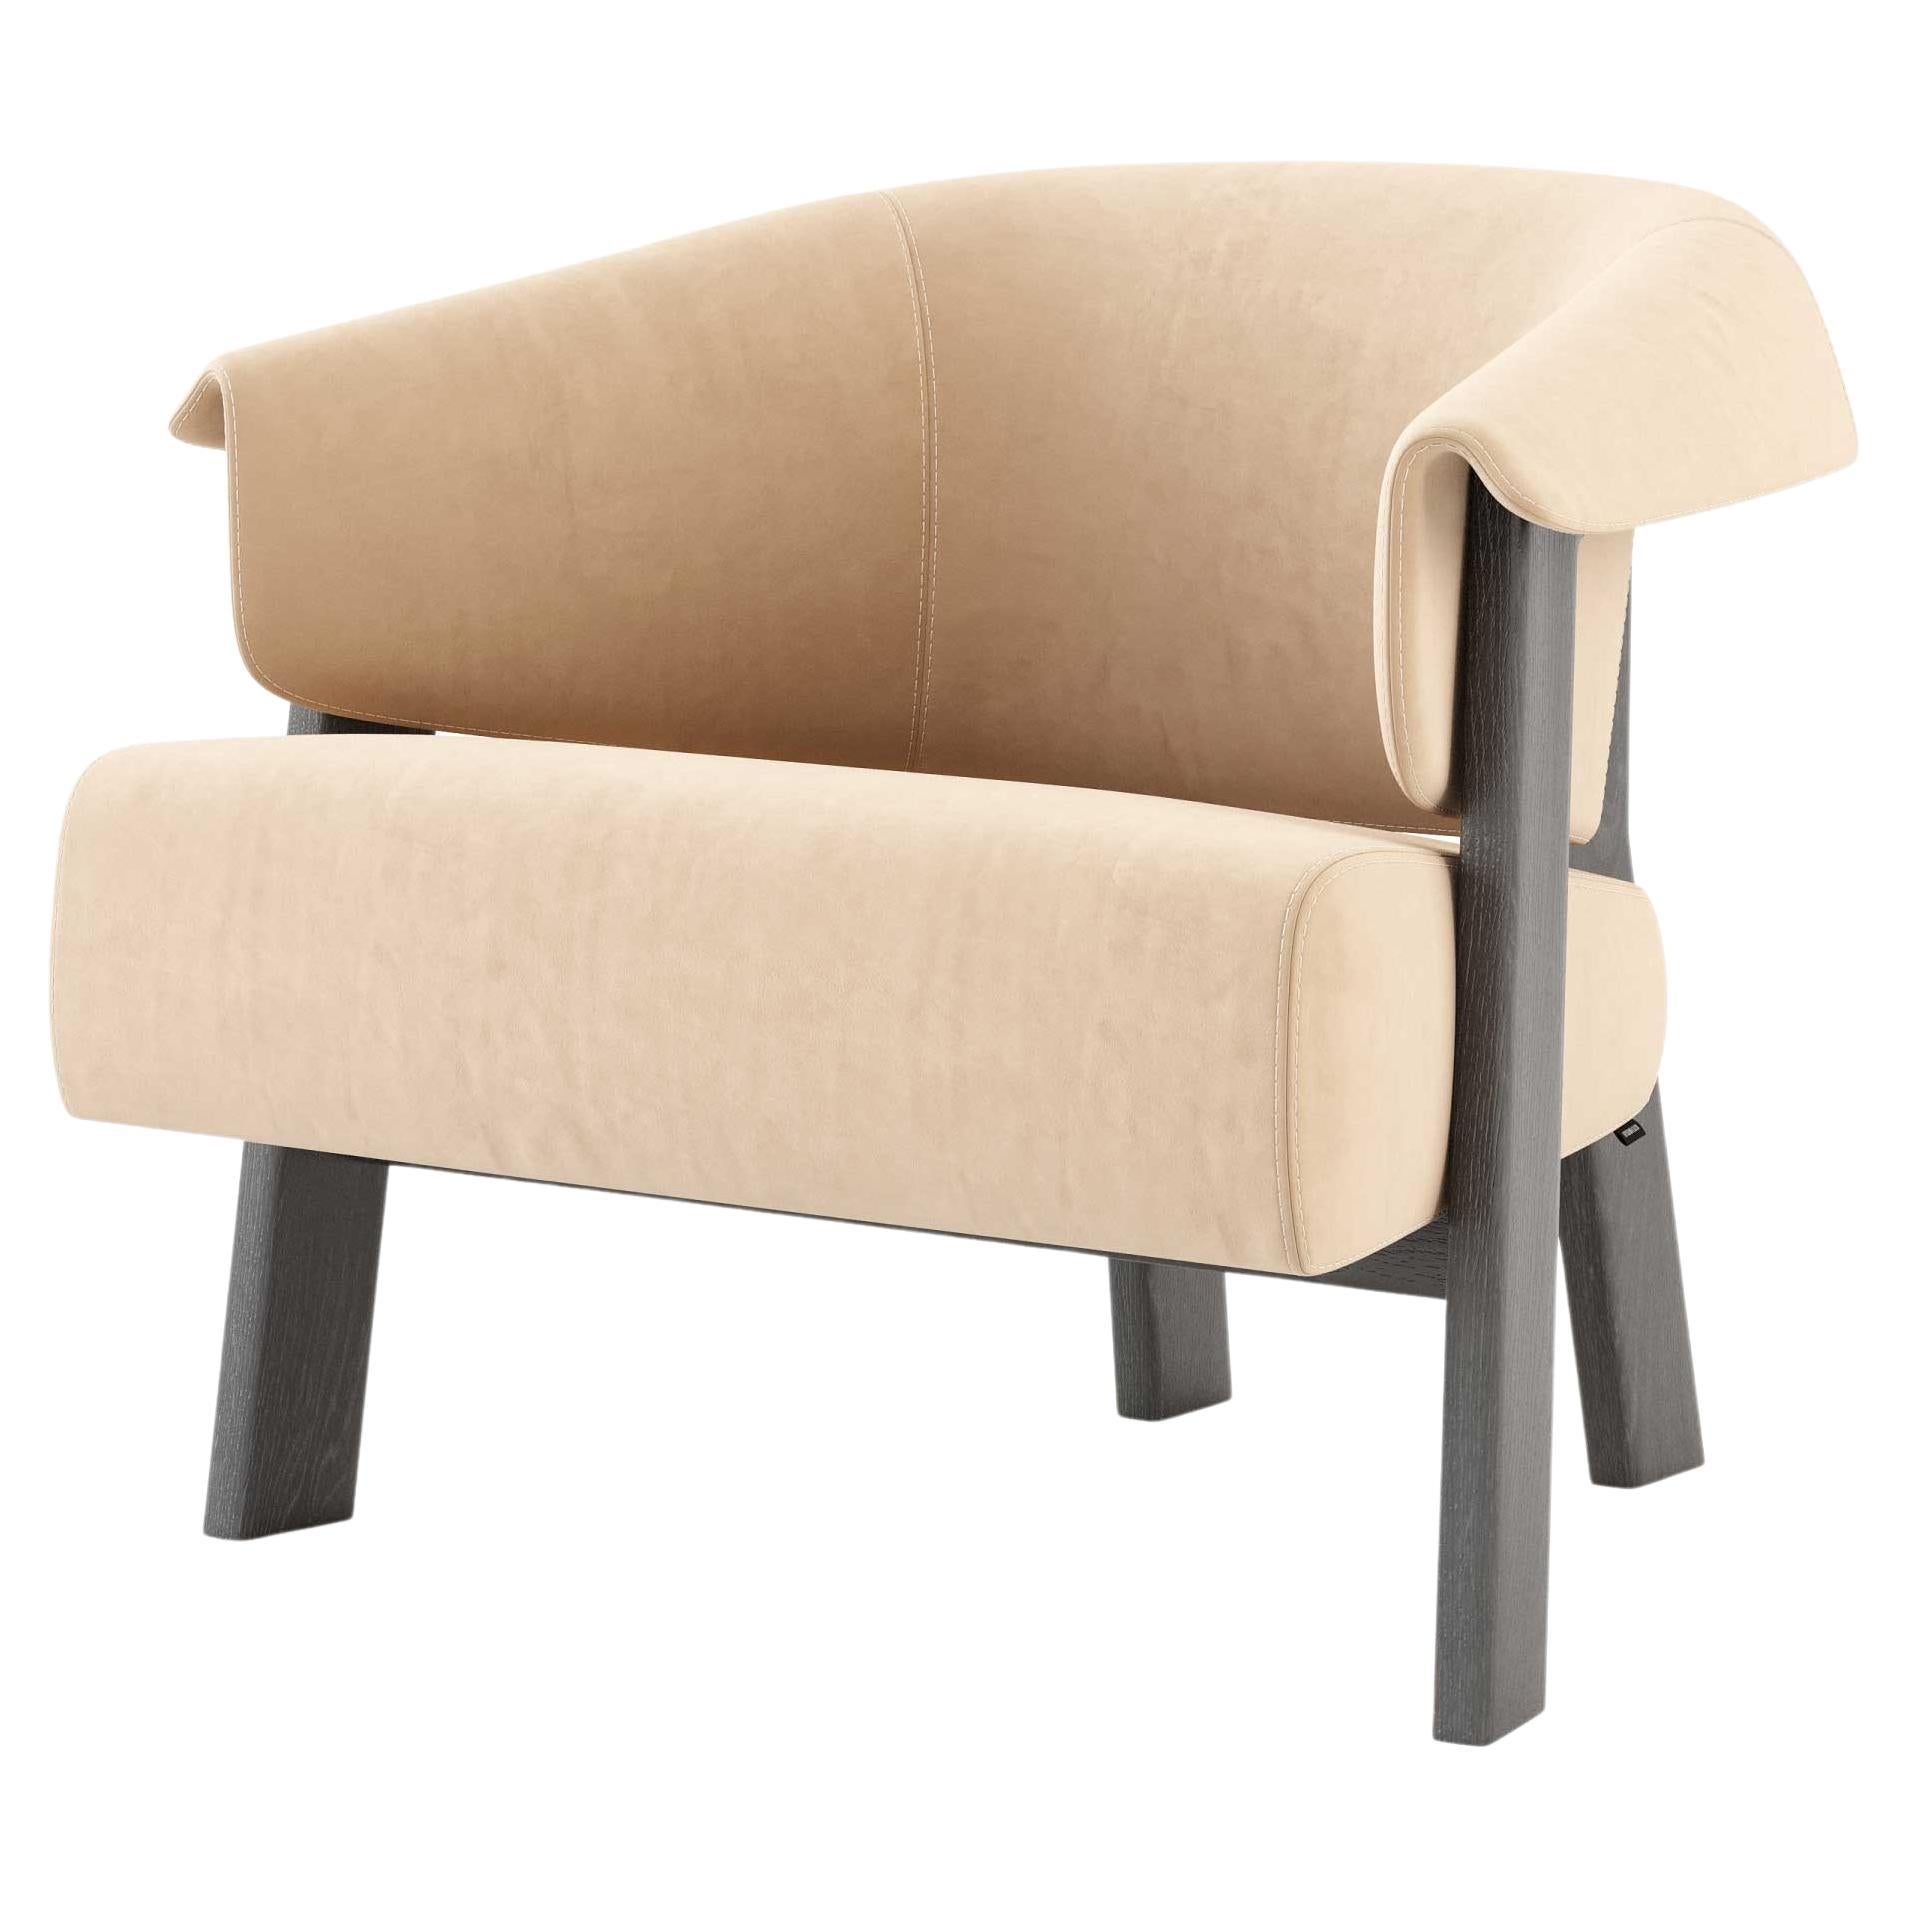 Modern Toro Armchair made with oak and suede, Handmade by Stylish Club